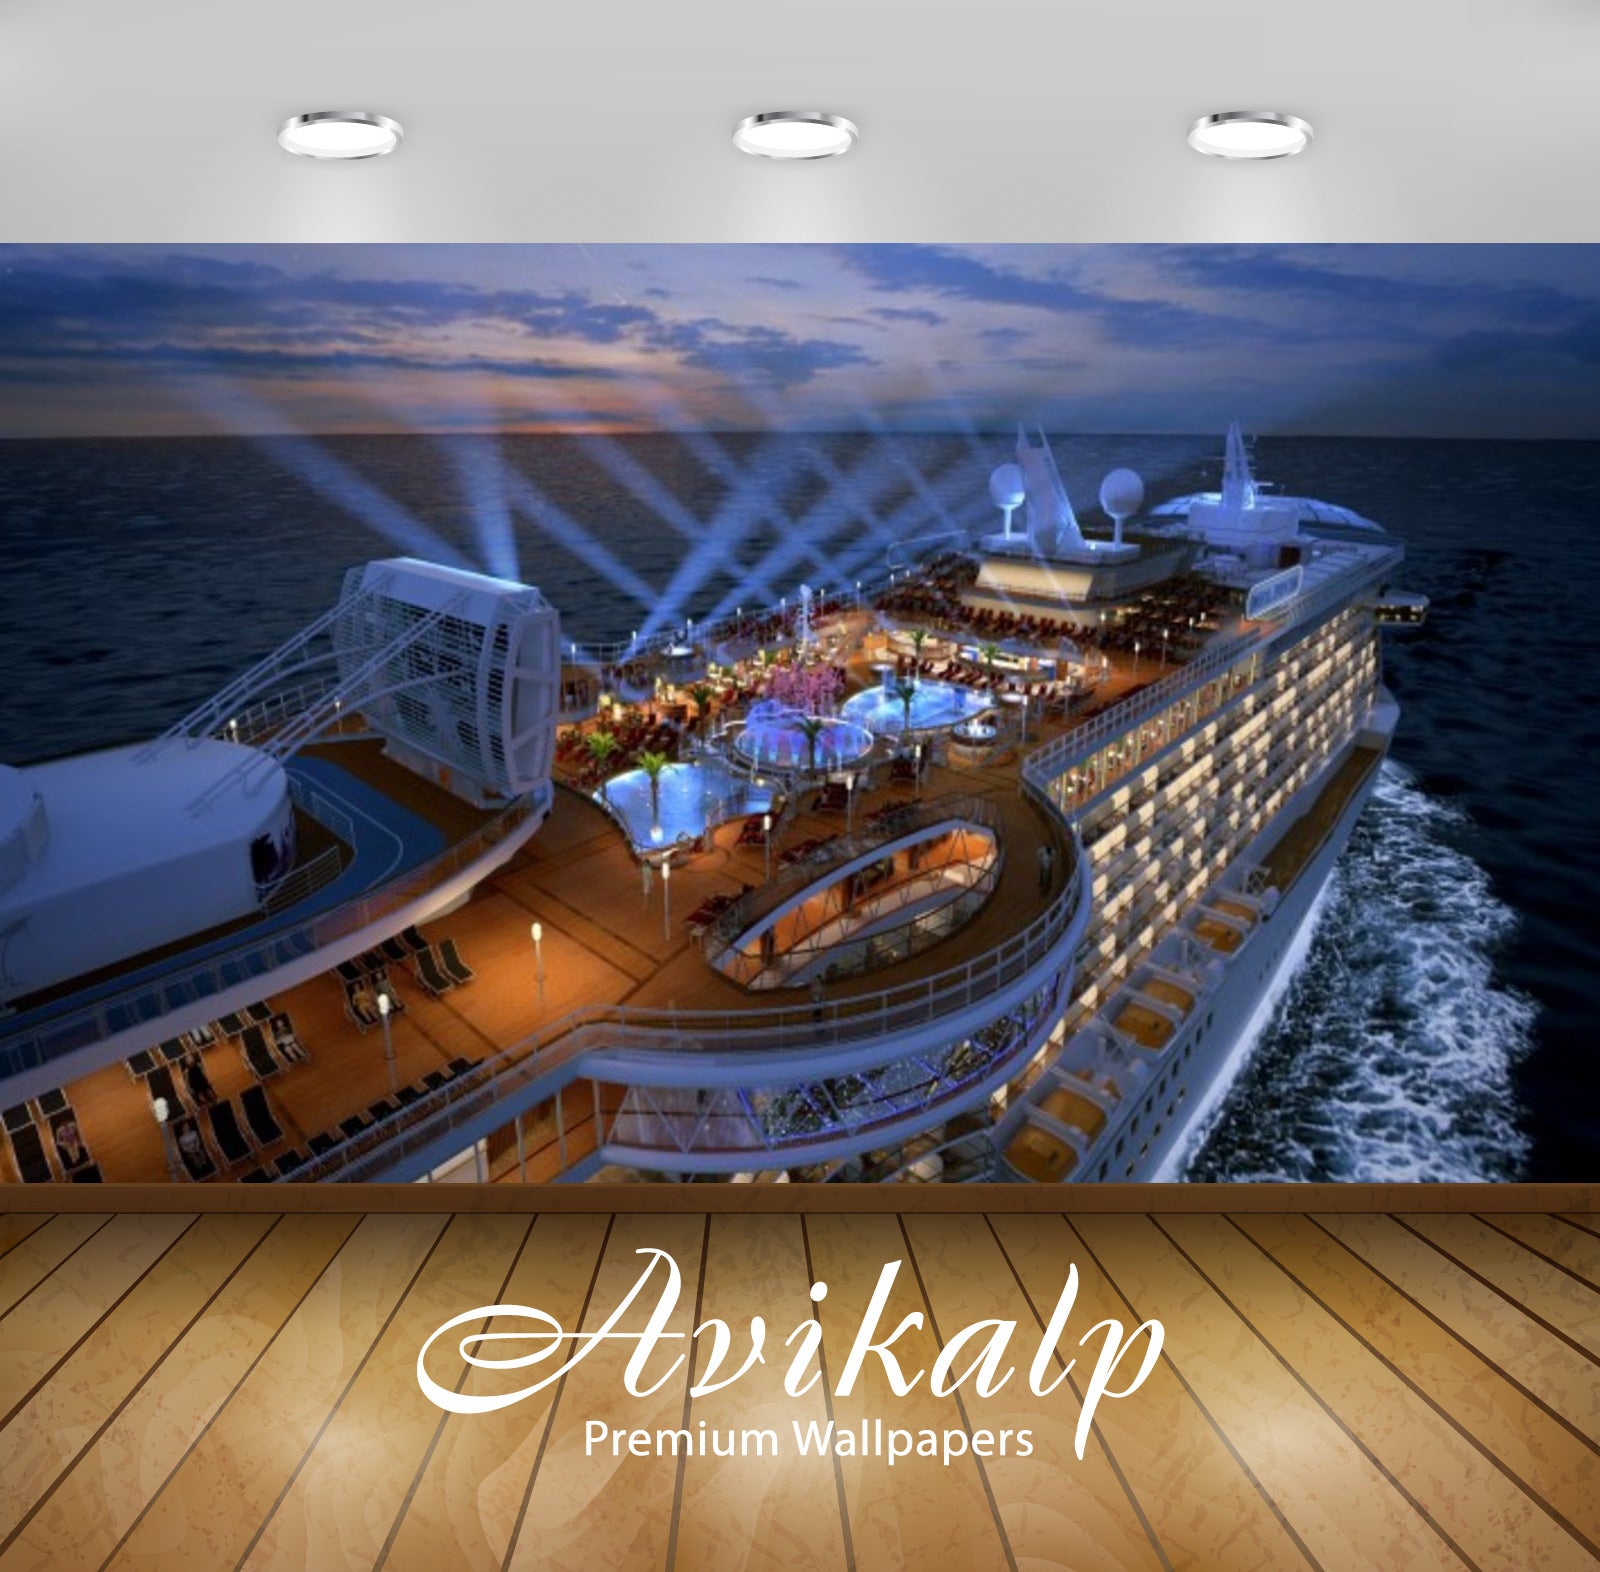 Avikalp Exclusive Awi2921 Princess Cruise Ruby Princess Night Full HD Wallpapers for Living room, Ha